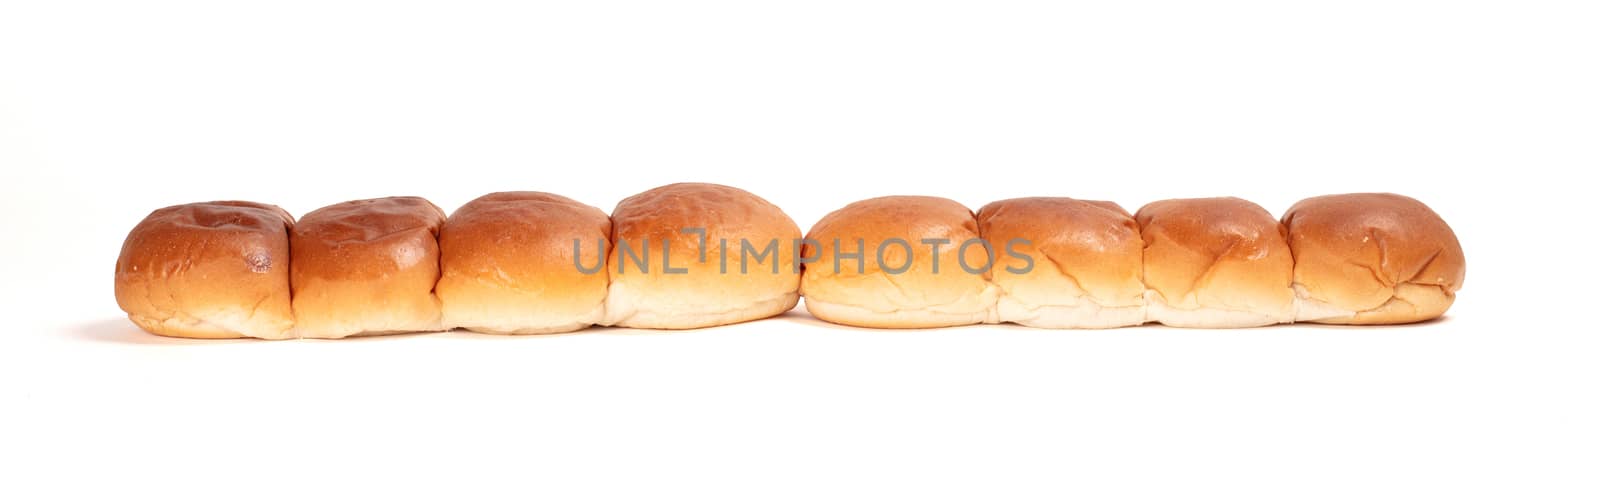 View of group small round bread, isolated on white